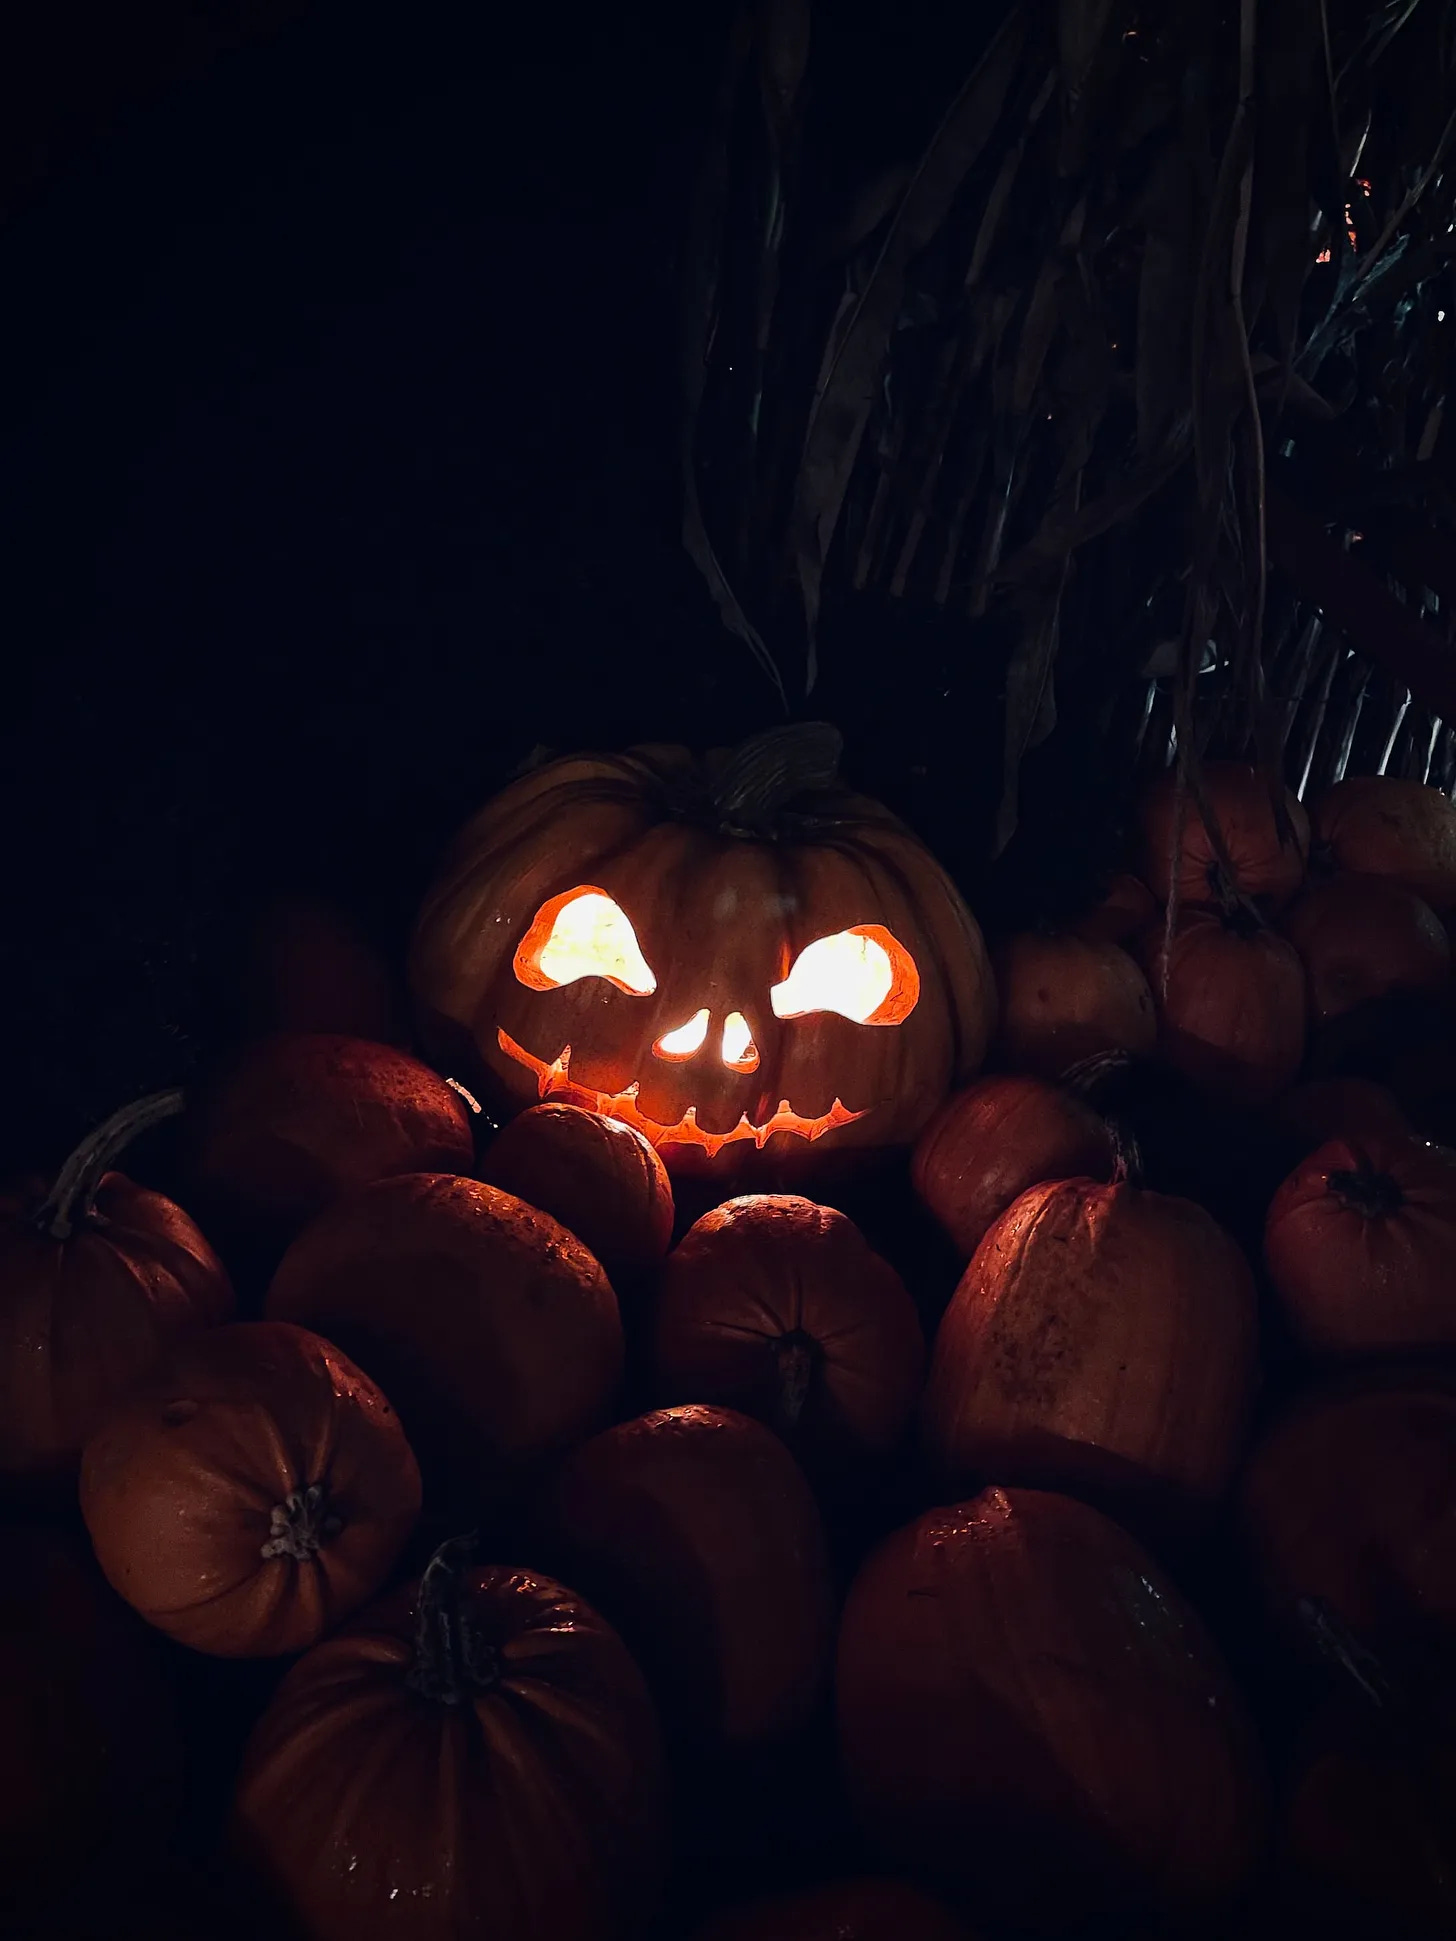 One jack-o-lantern in a pile of pumpkins at night